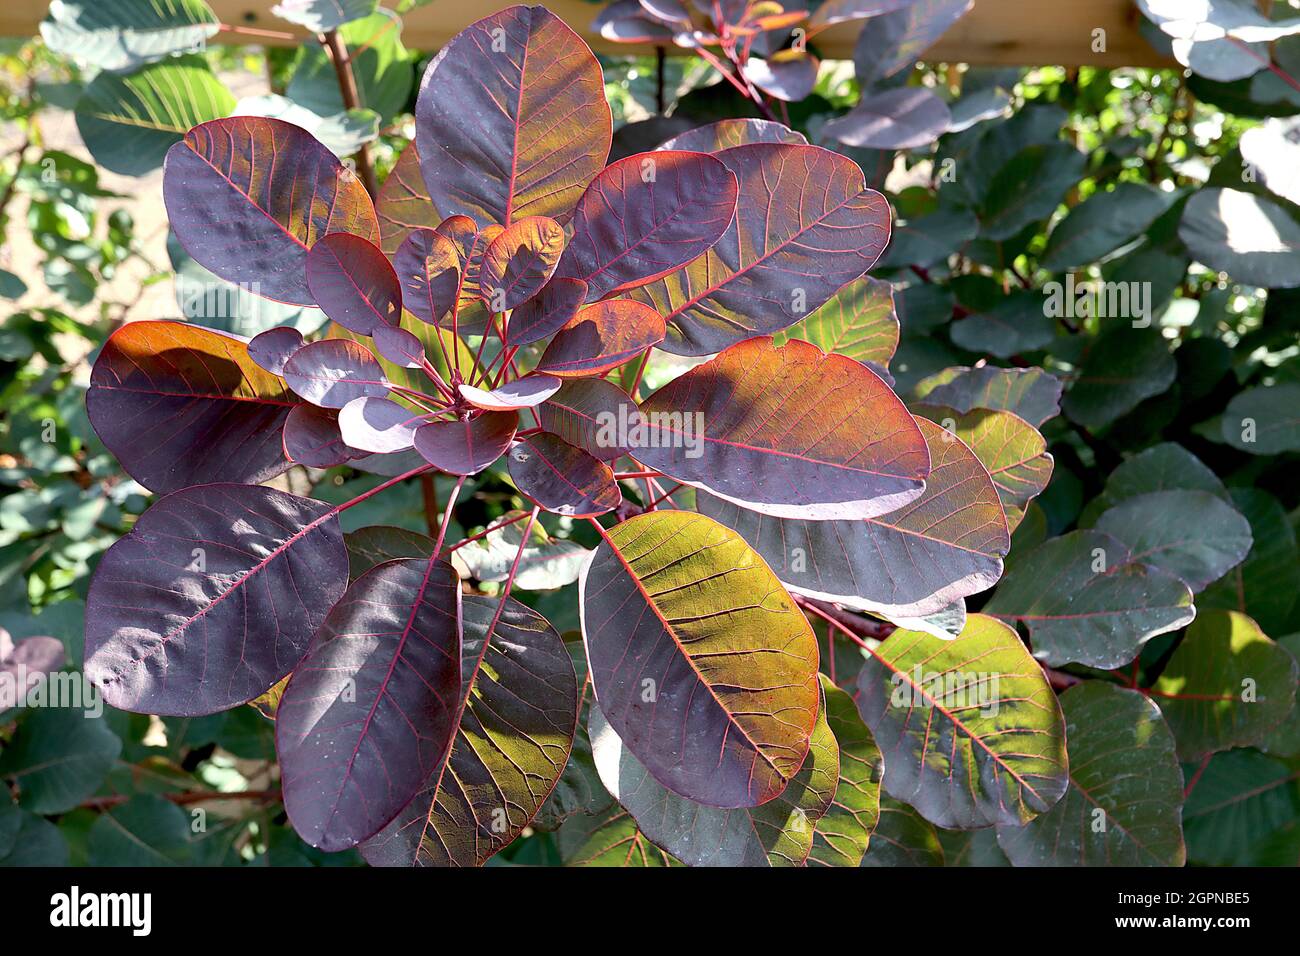 Cotinus coggygria ‘Ruby Glow’ smoke bush Ruby Glow – purple green ovate leaves with red veins and stalks,  September, England, UK Stock Photo